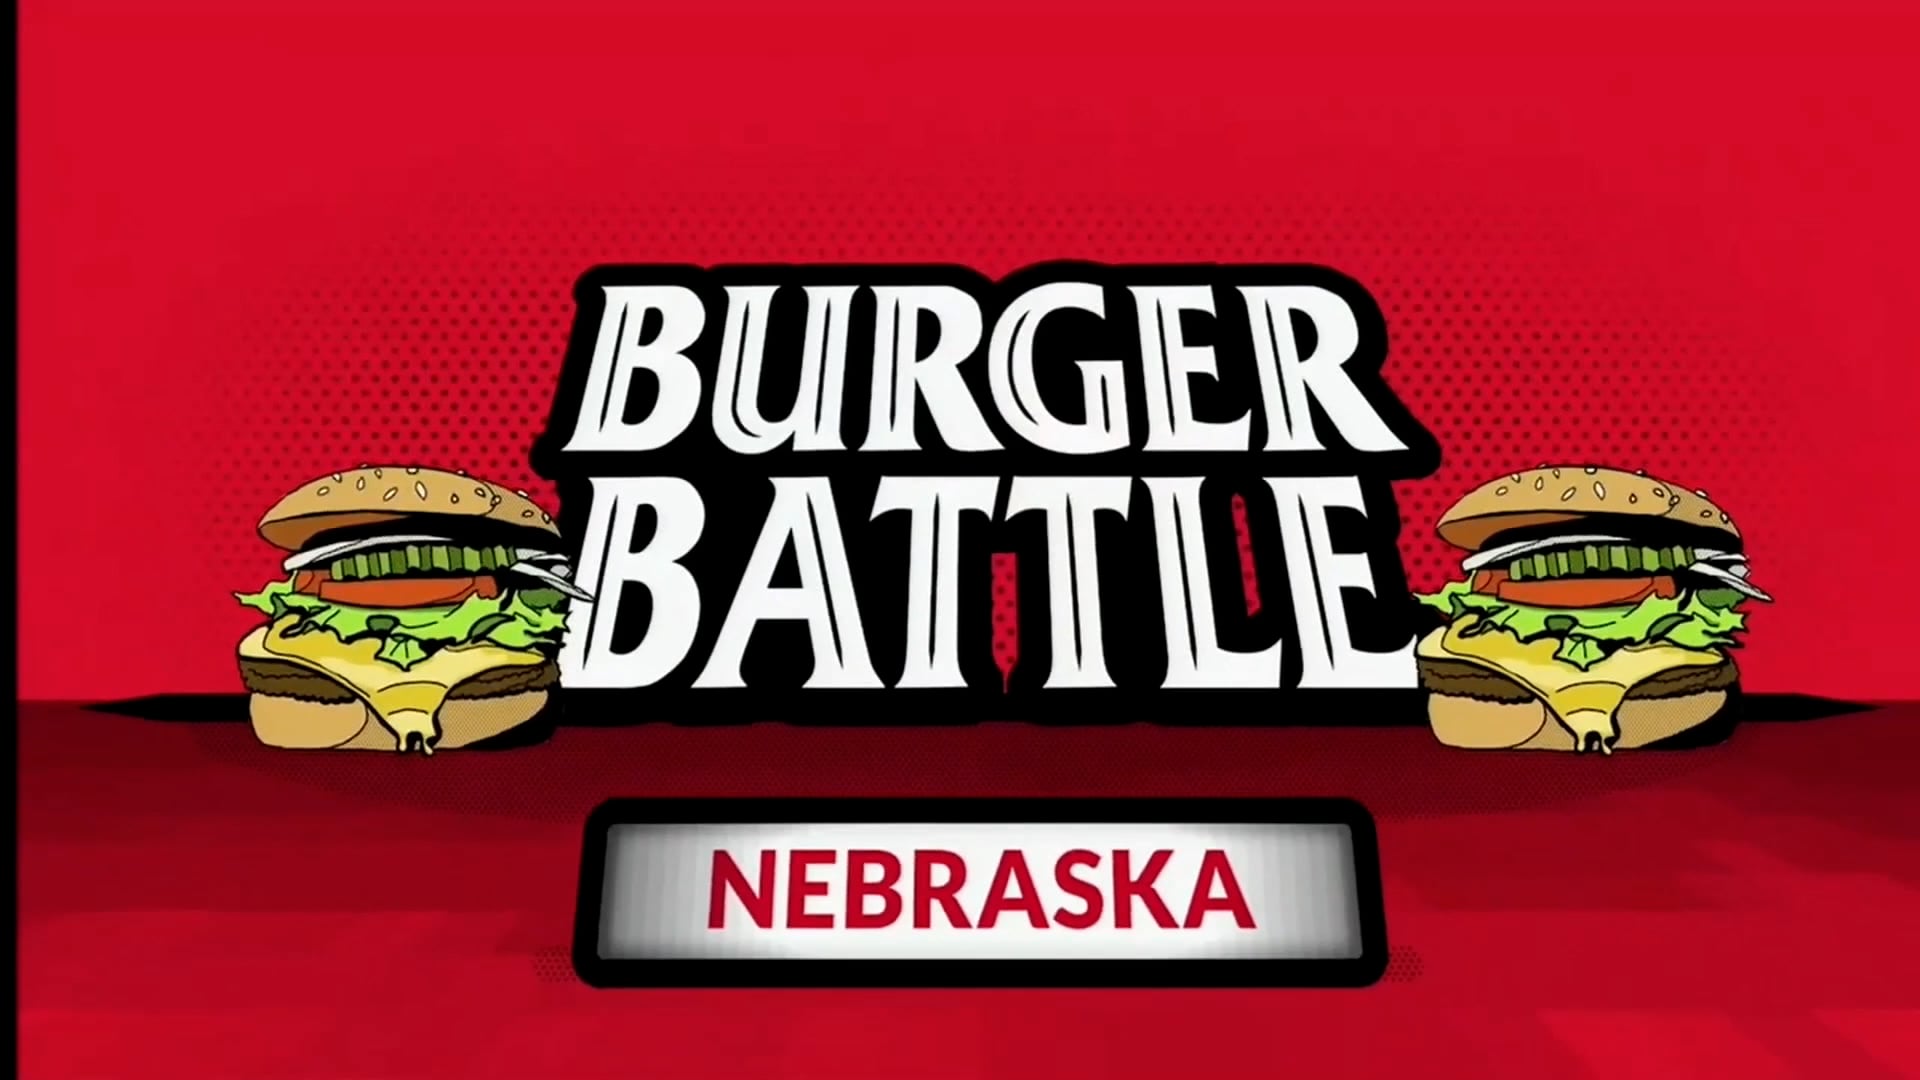 Burger Battle B1G Tailgate Live from Lincoln (B1G Contracted Work)